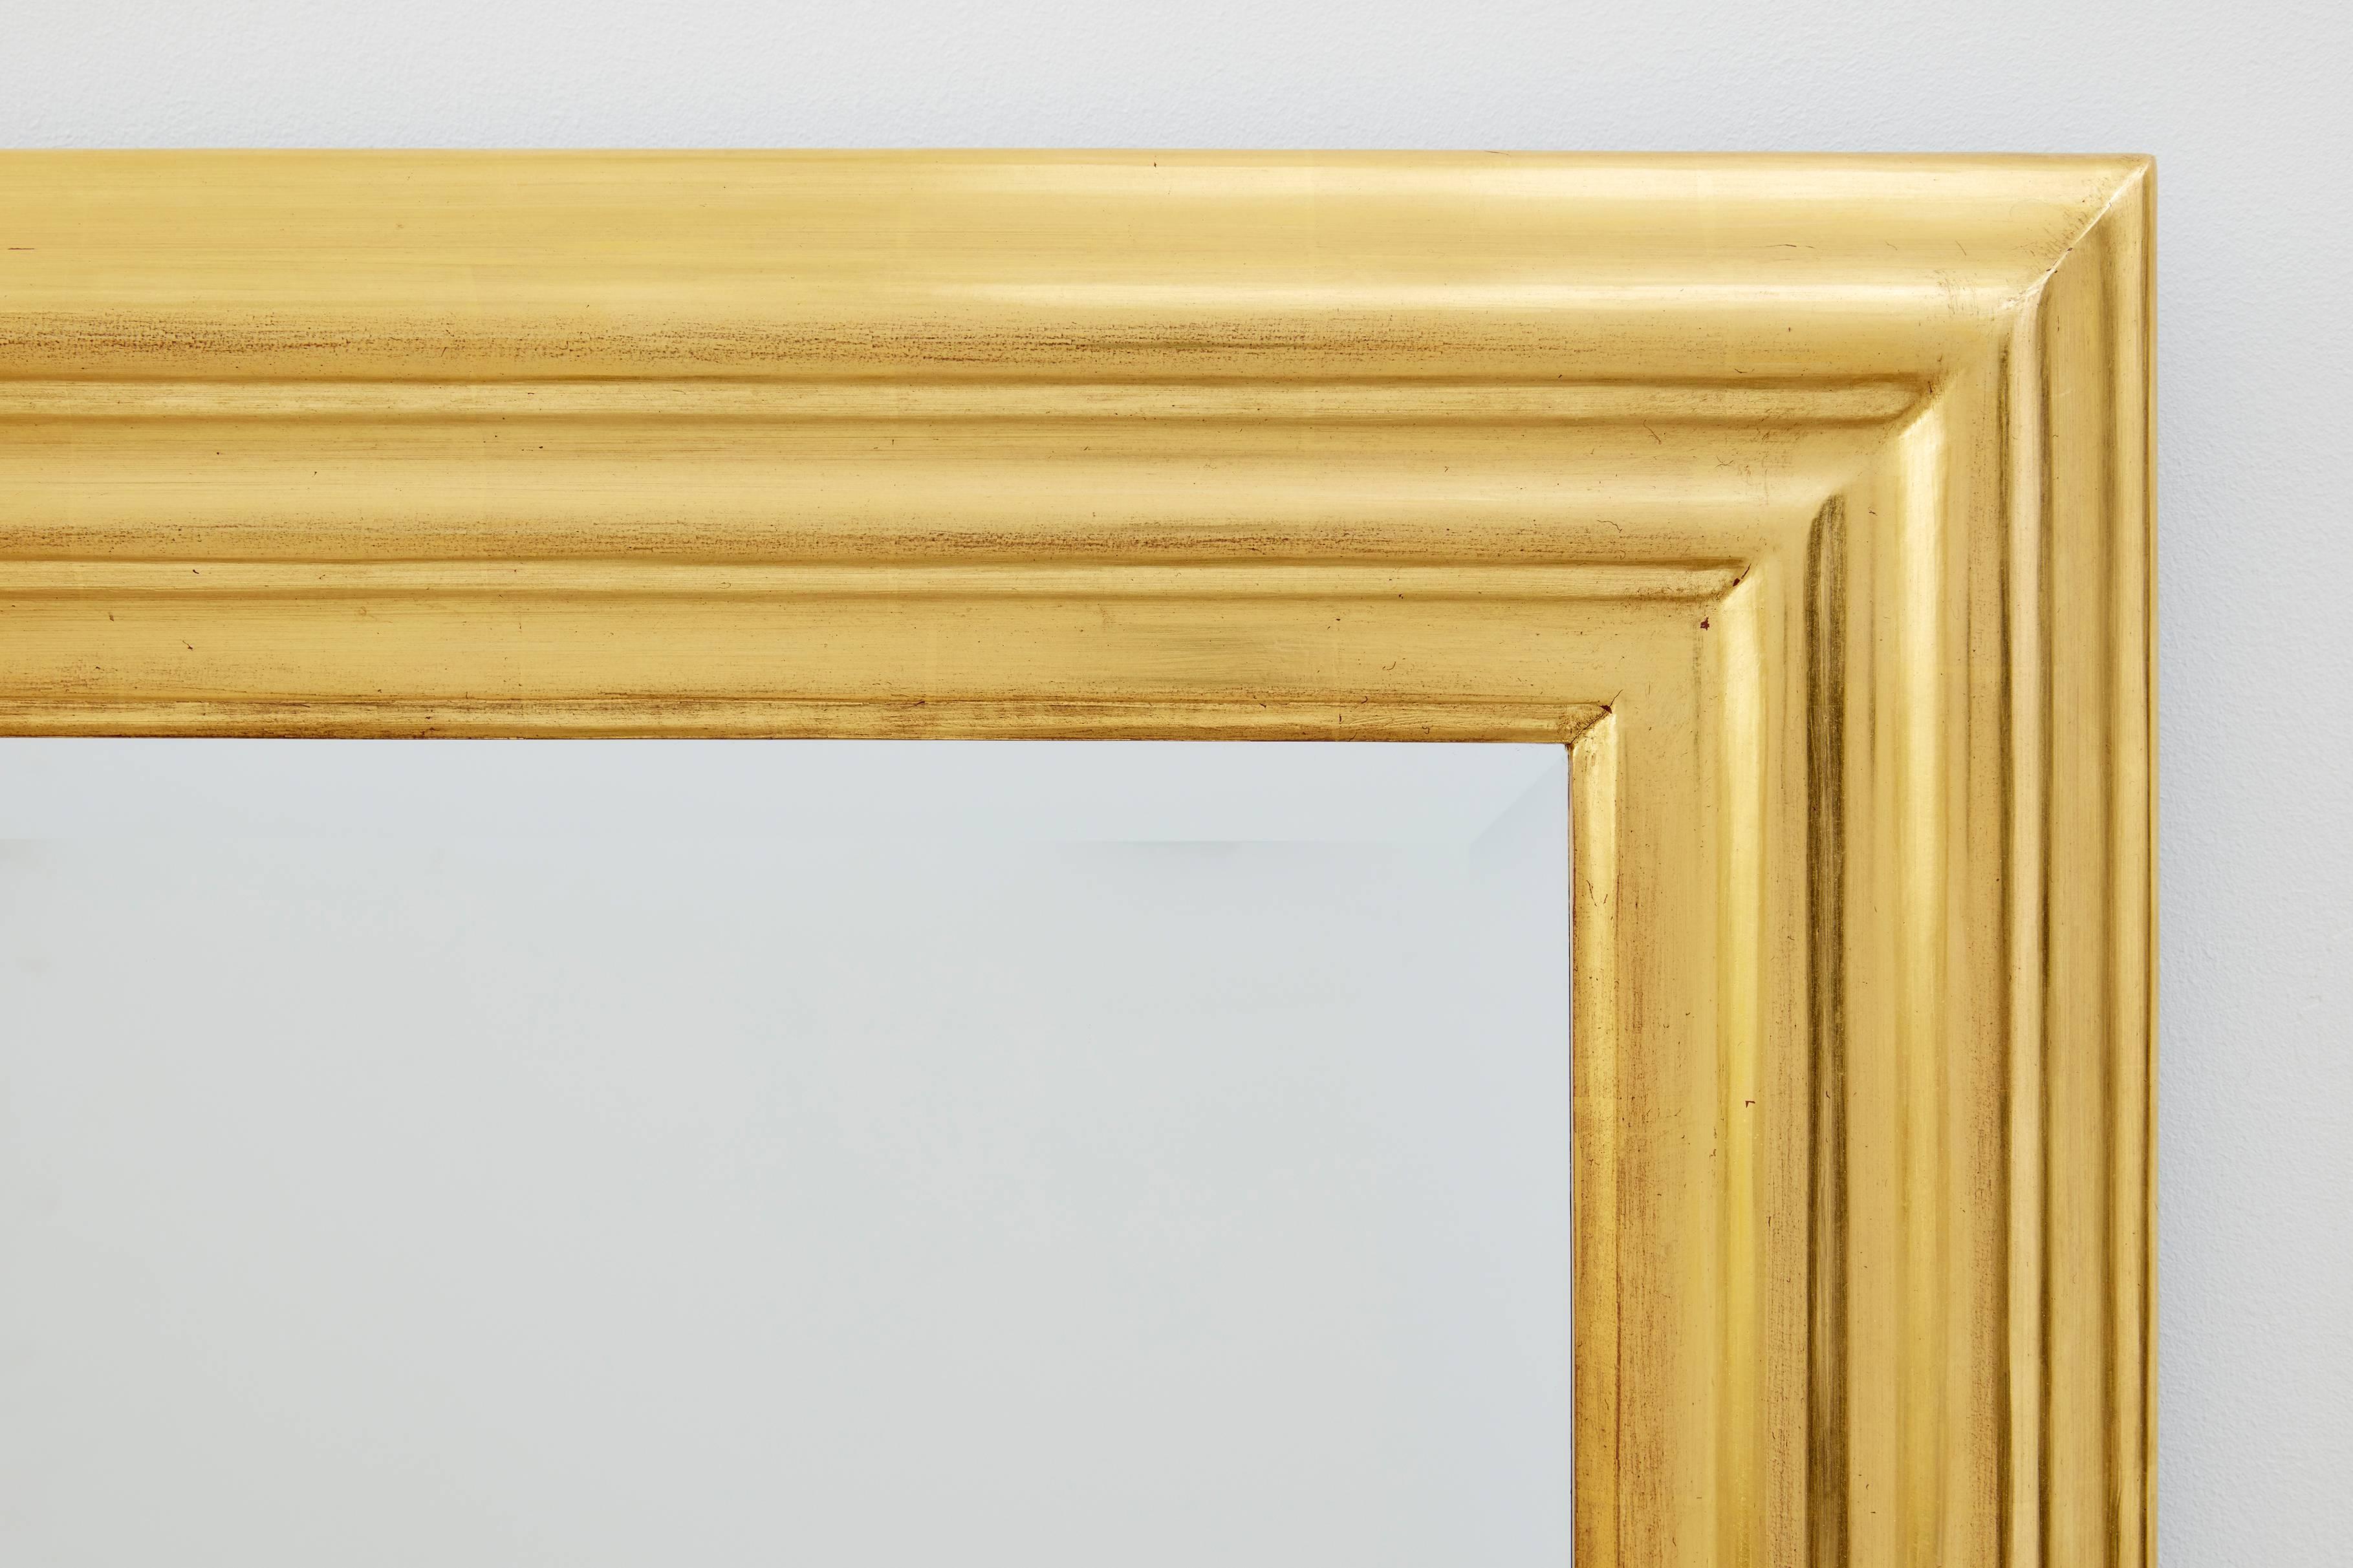 Organic Modern Degas No. 6 Ripple Wall Mirror, Gilded in 23kt Yellow Gold, by Bark Frameworks For Sale